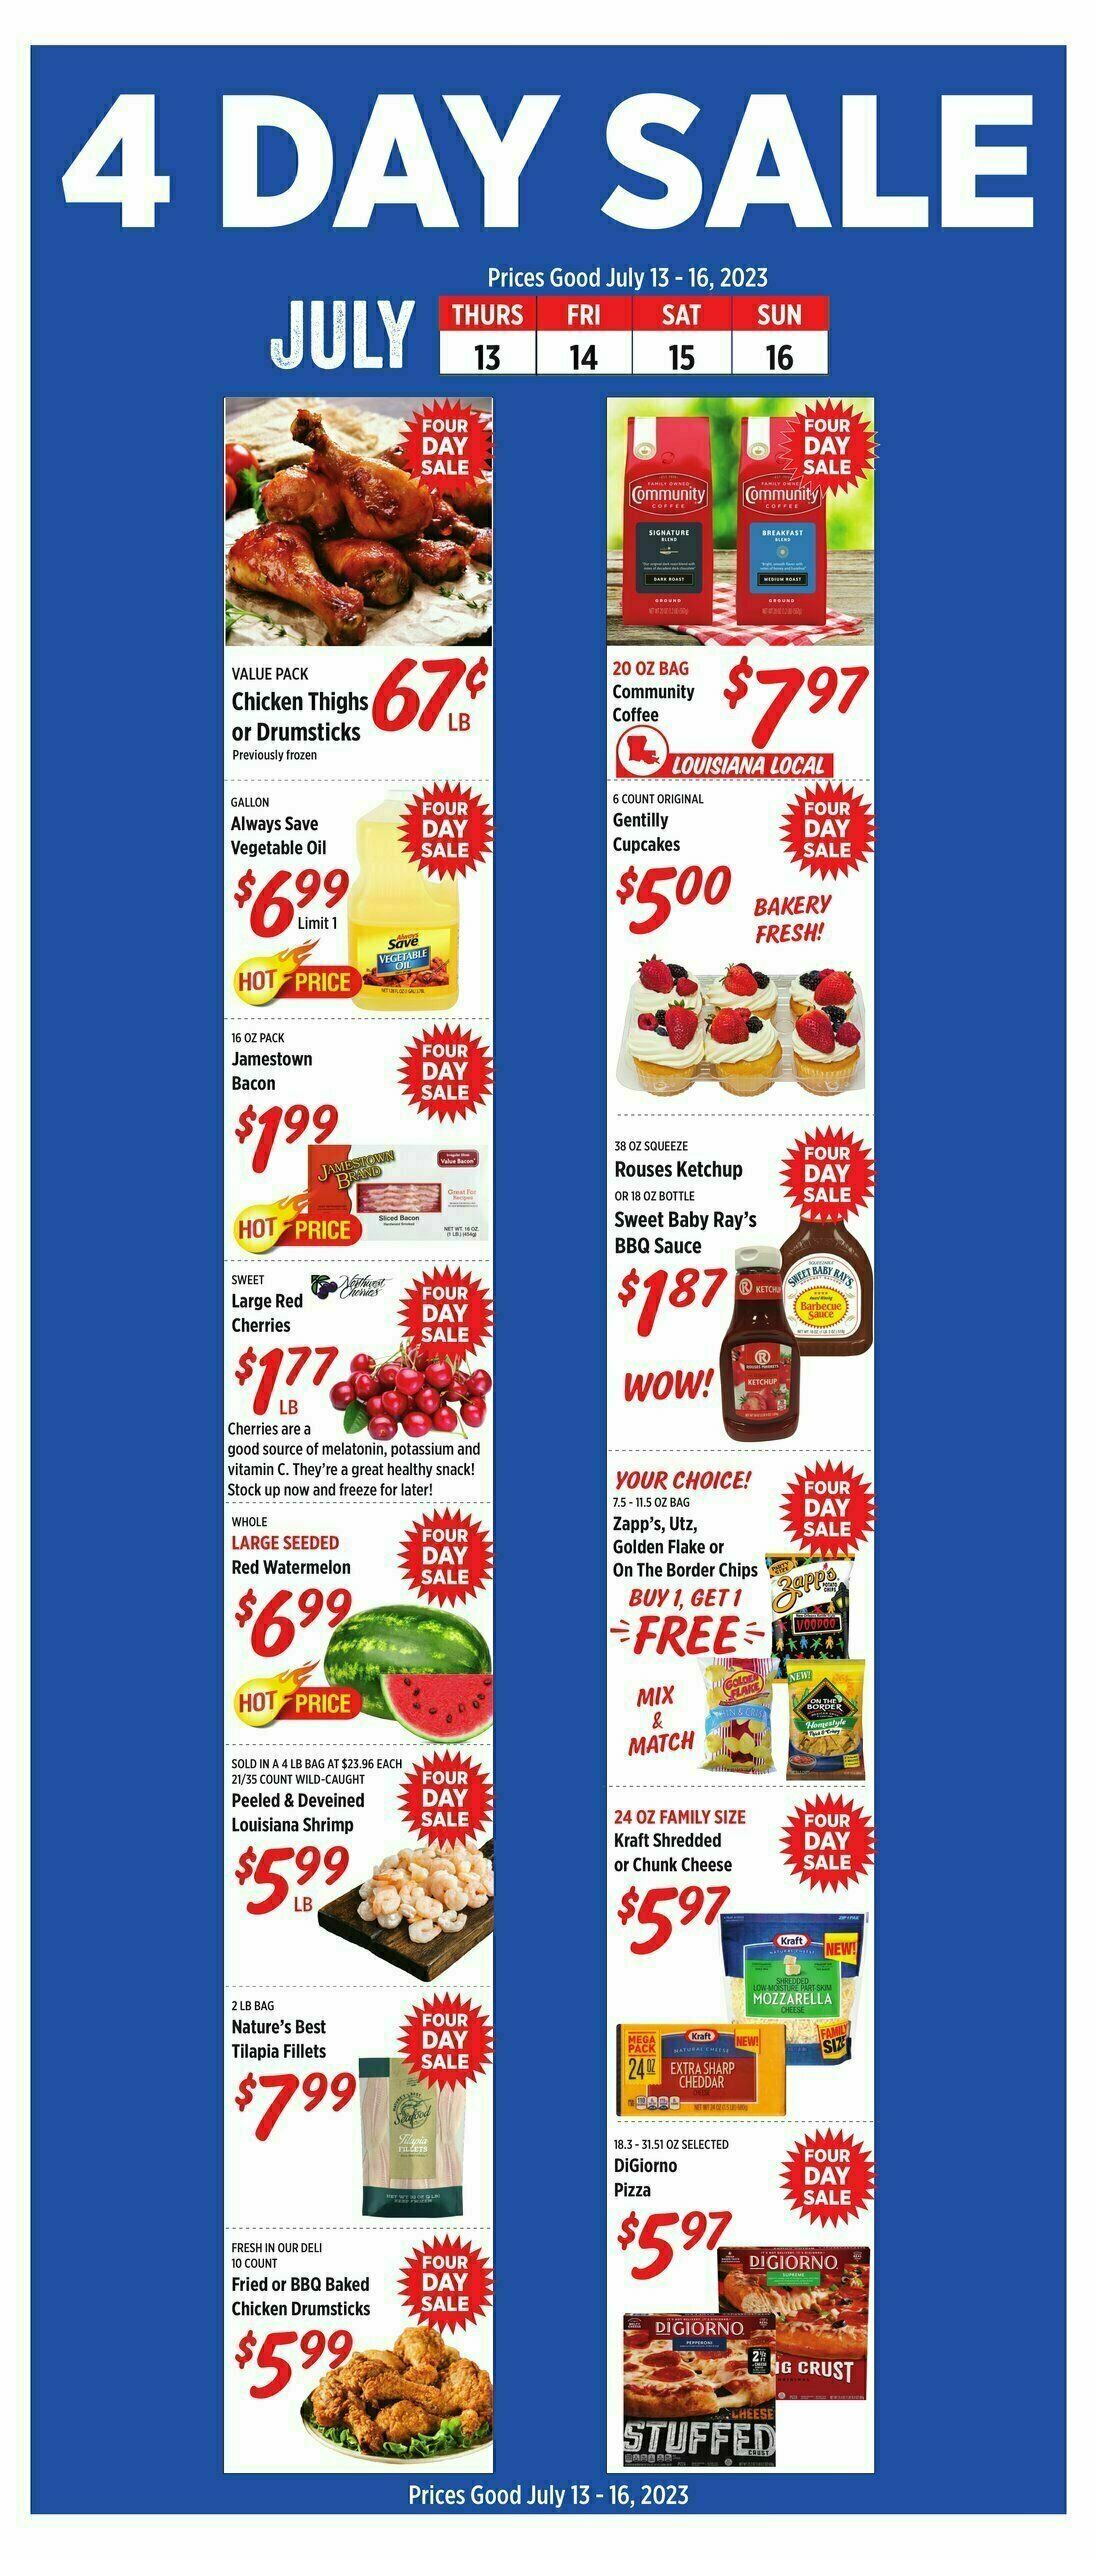 Rouses Markets Weekly Ad from July 12